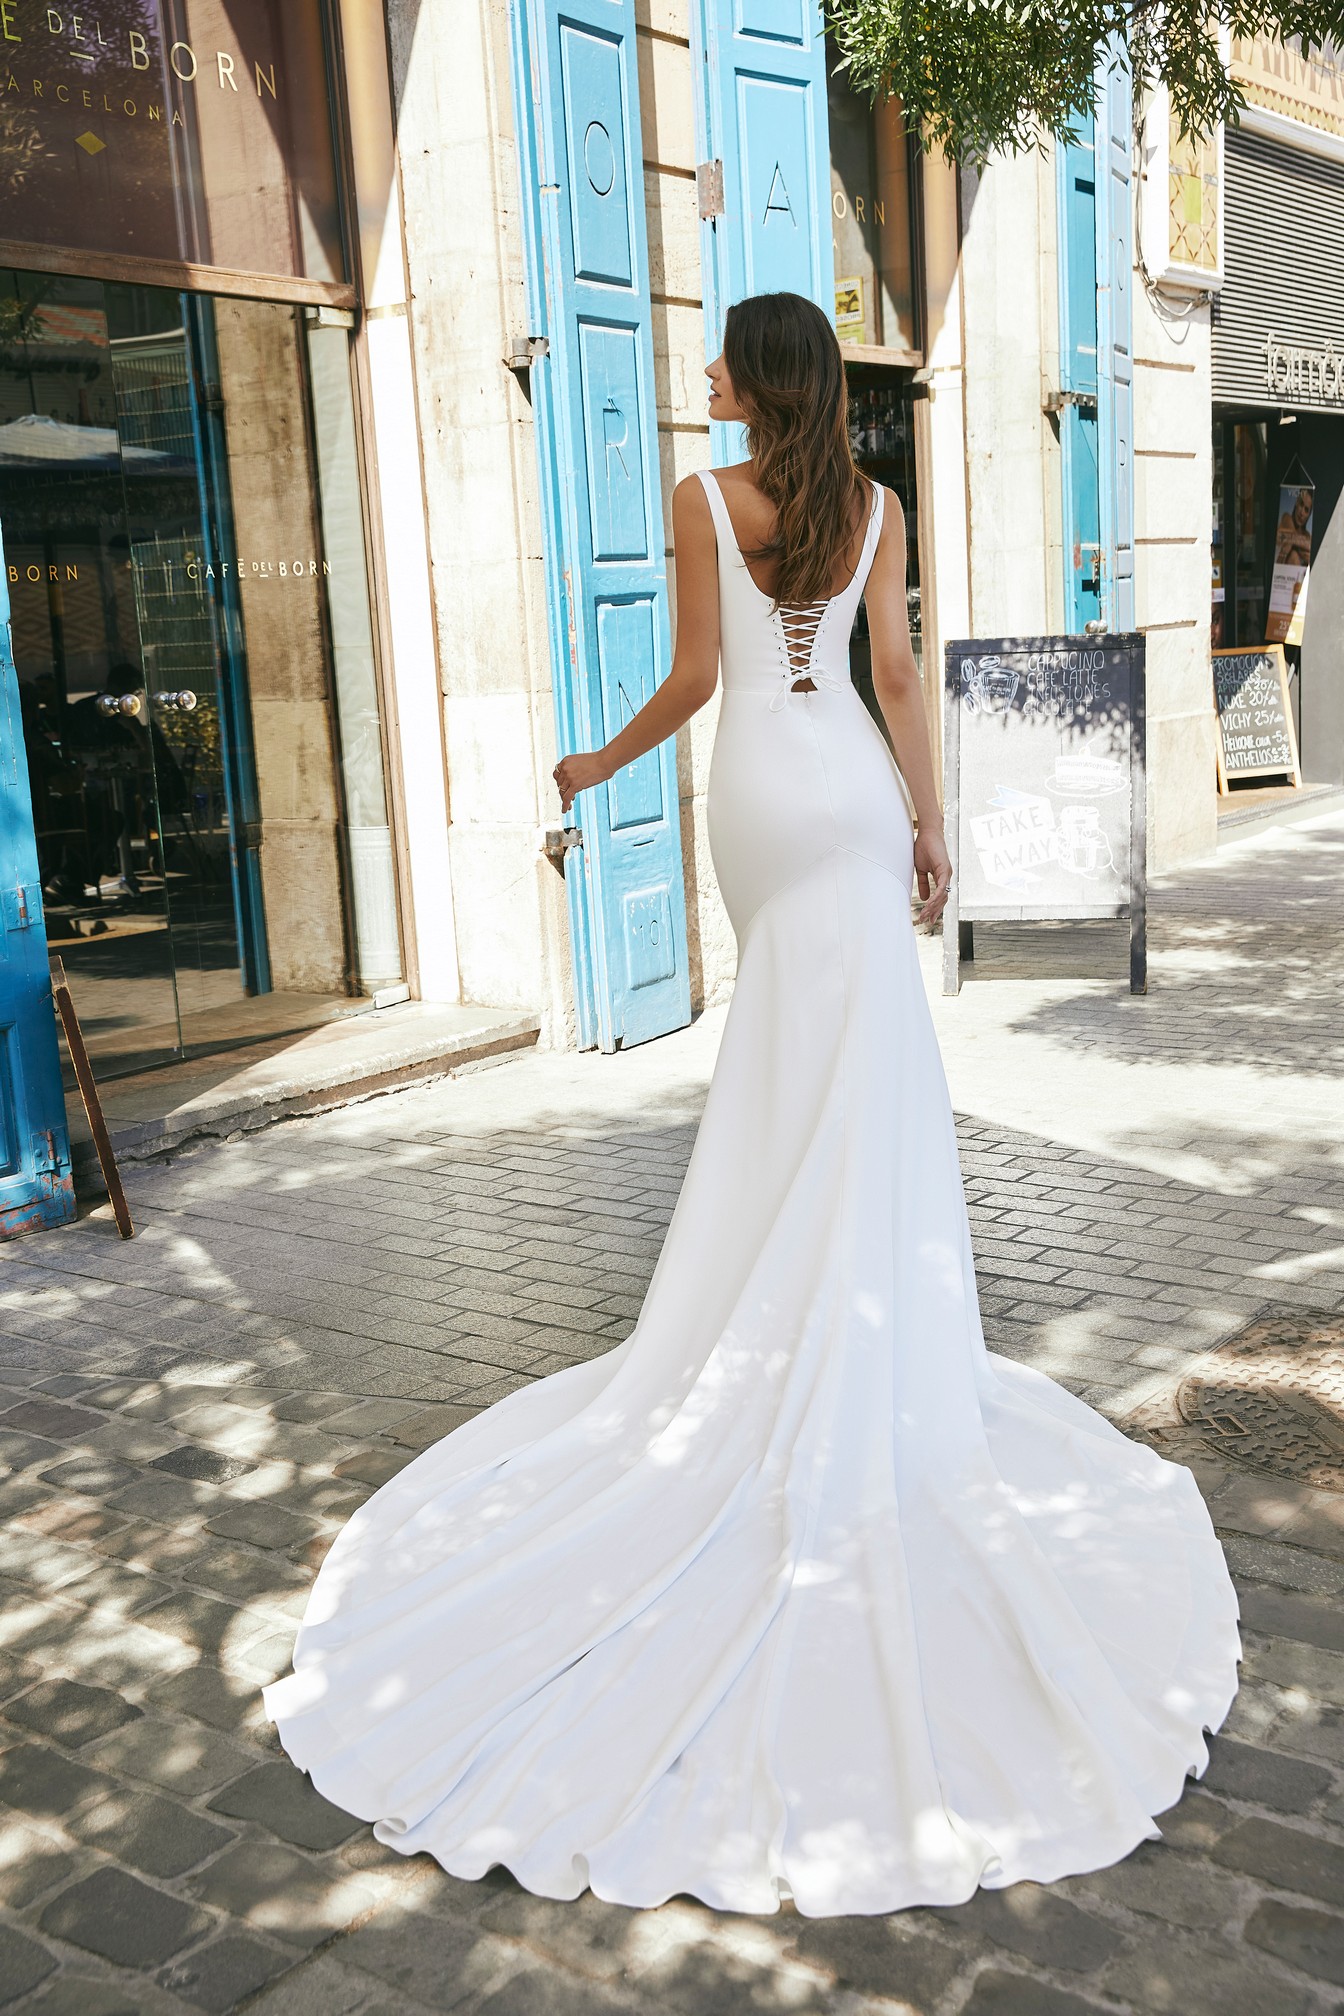 Back image of woman standing in front of Barcelona cafe bar in crepe wedding dress with long train